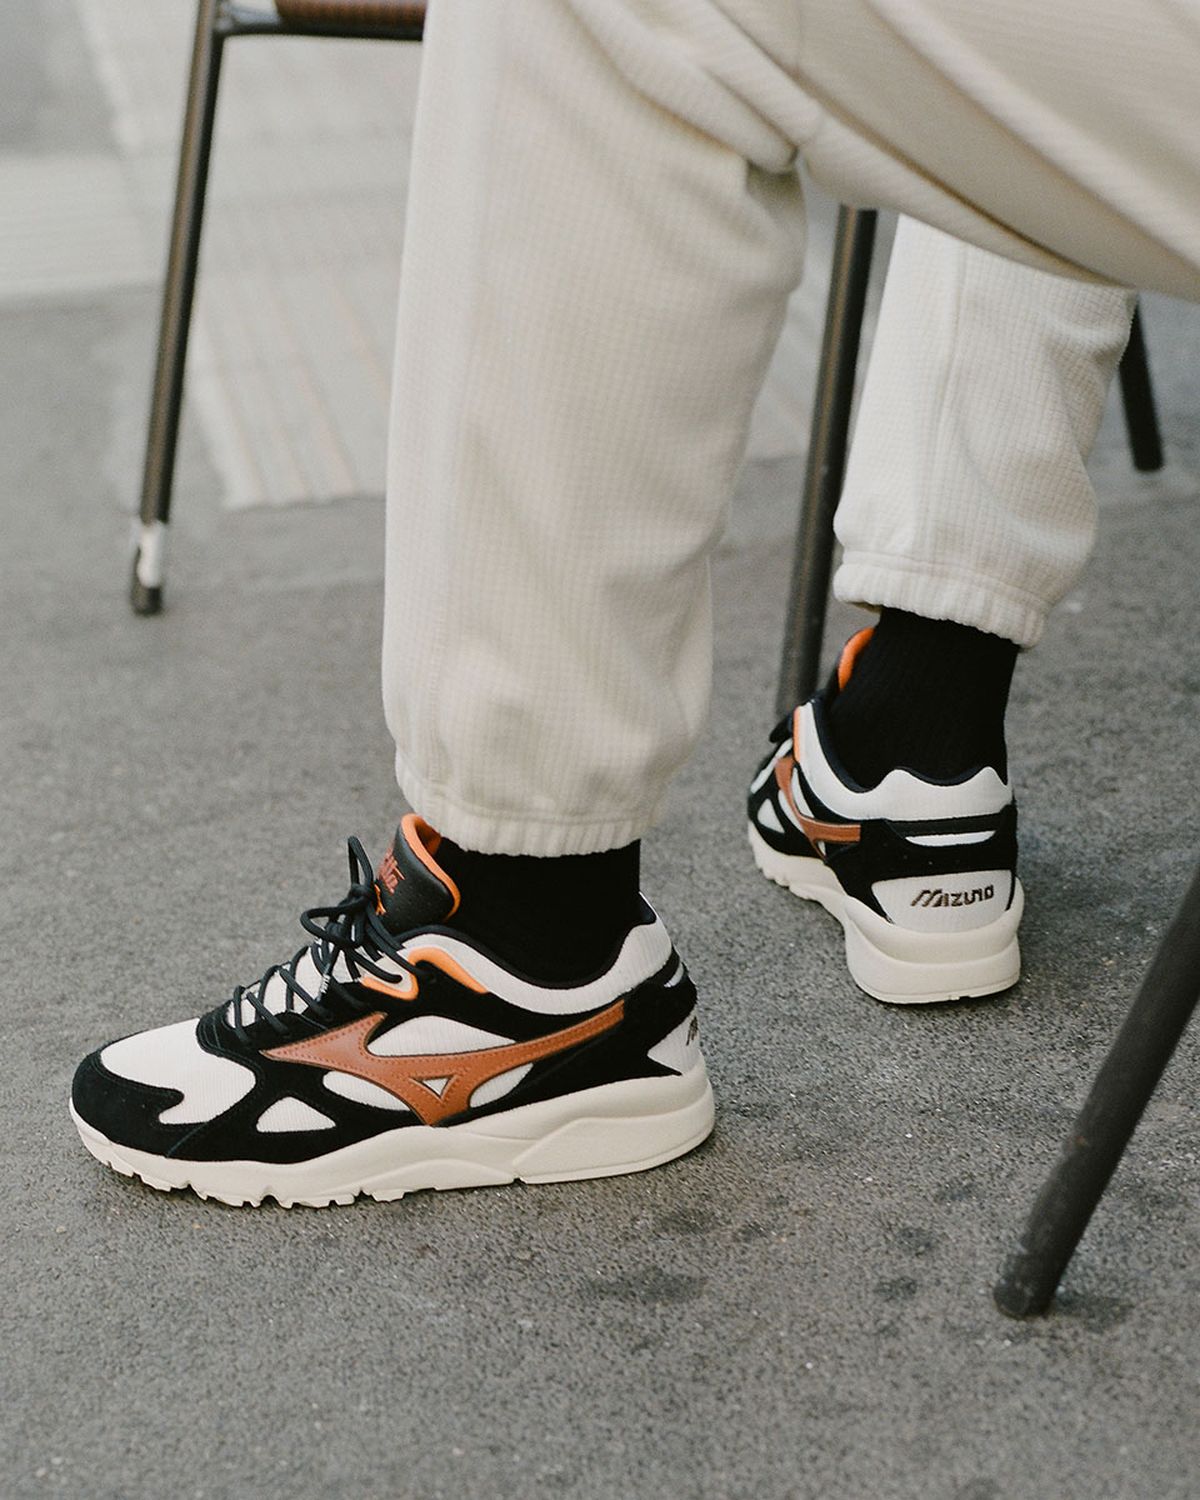 Patta x Mizuno Sky Medal: Official Images & Release Info